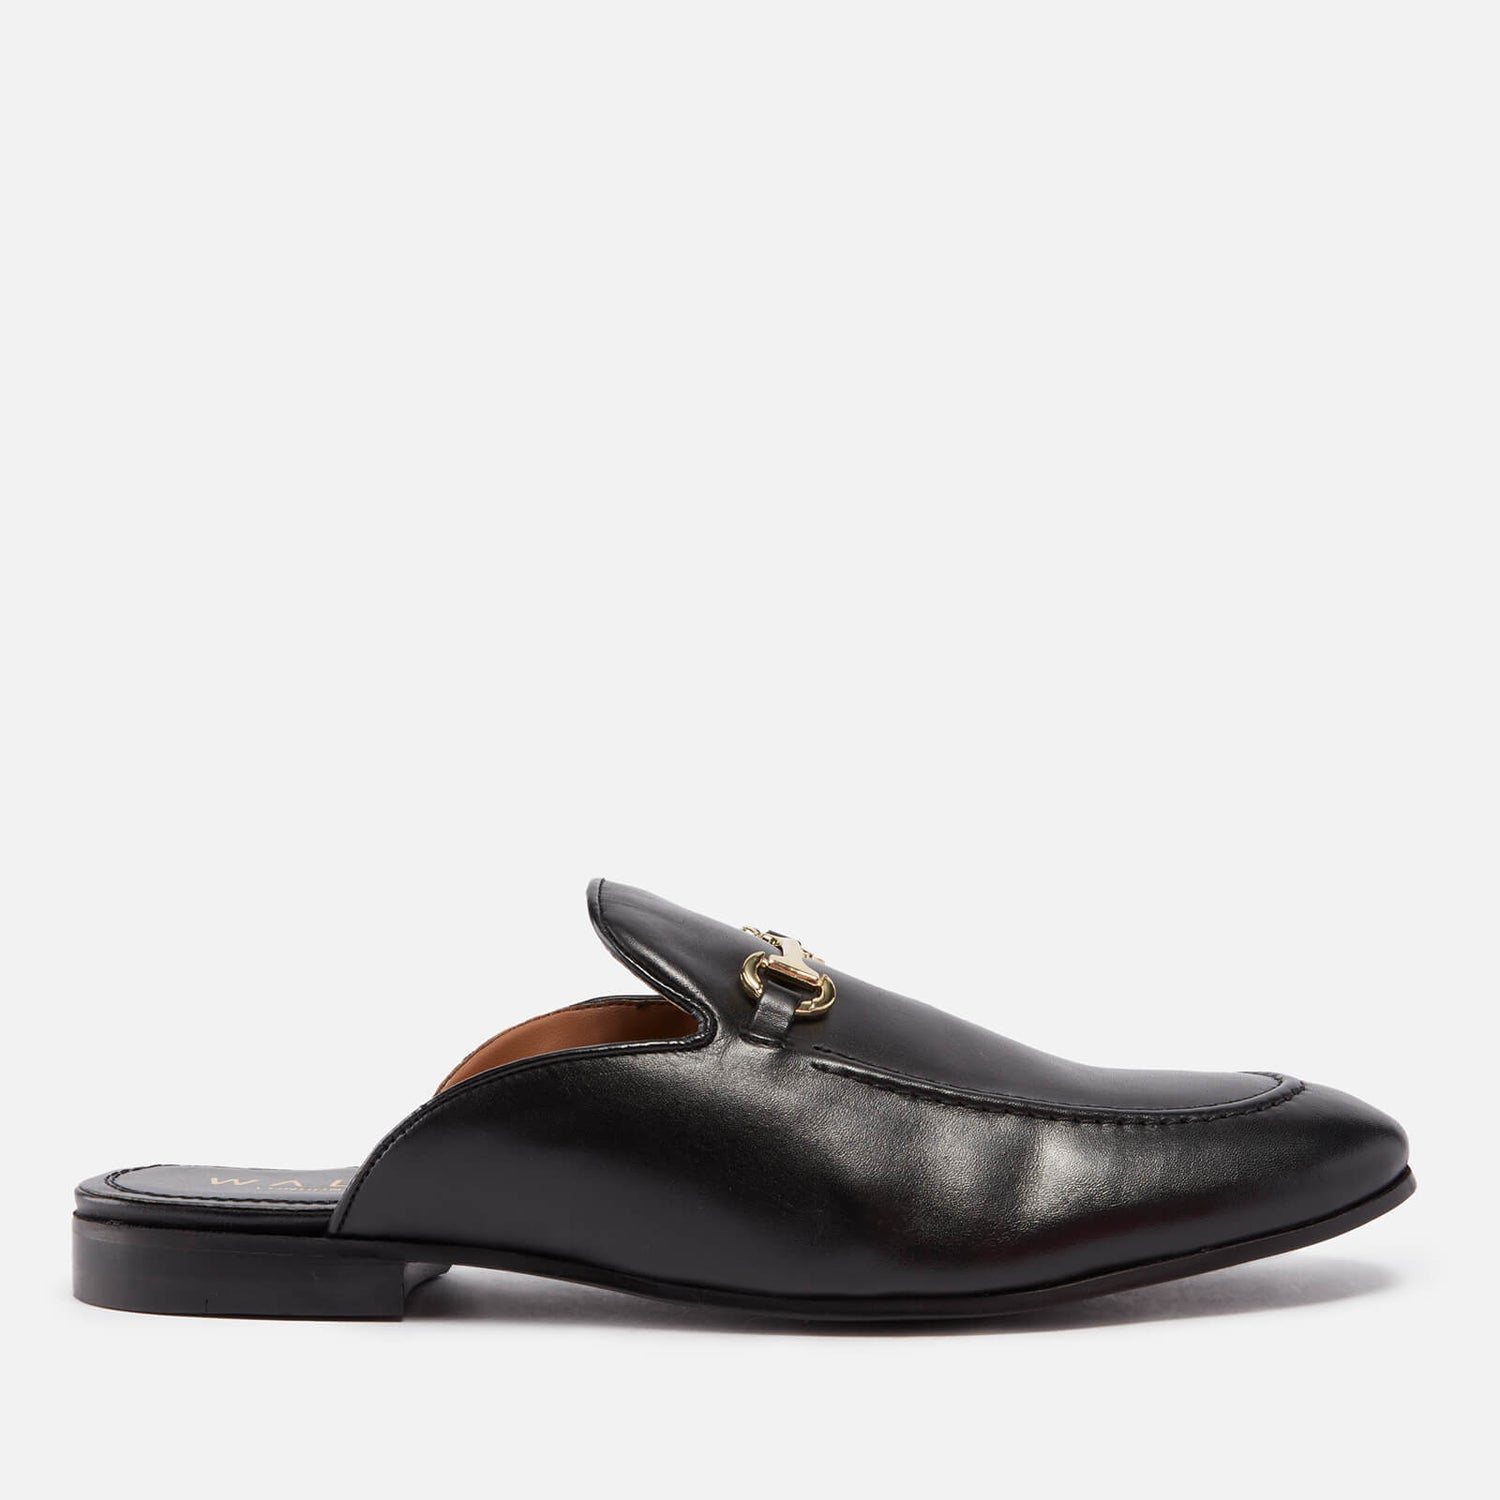 Walk London Terry Leather Mules - 8